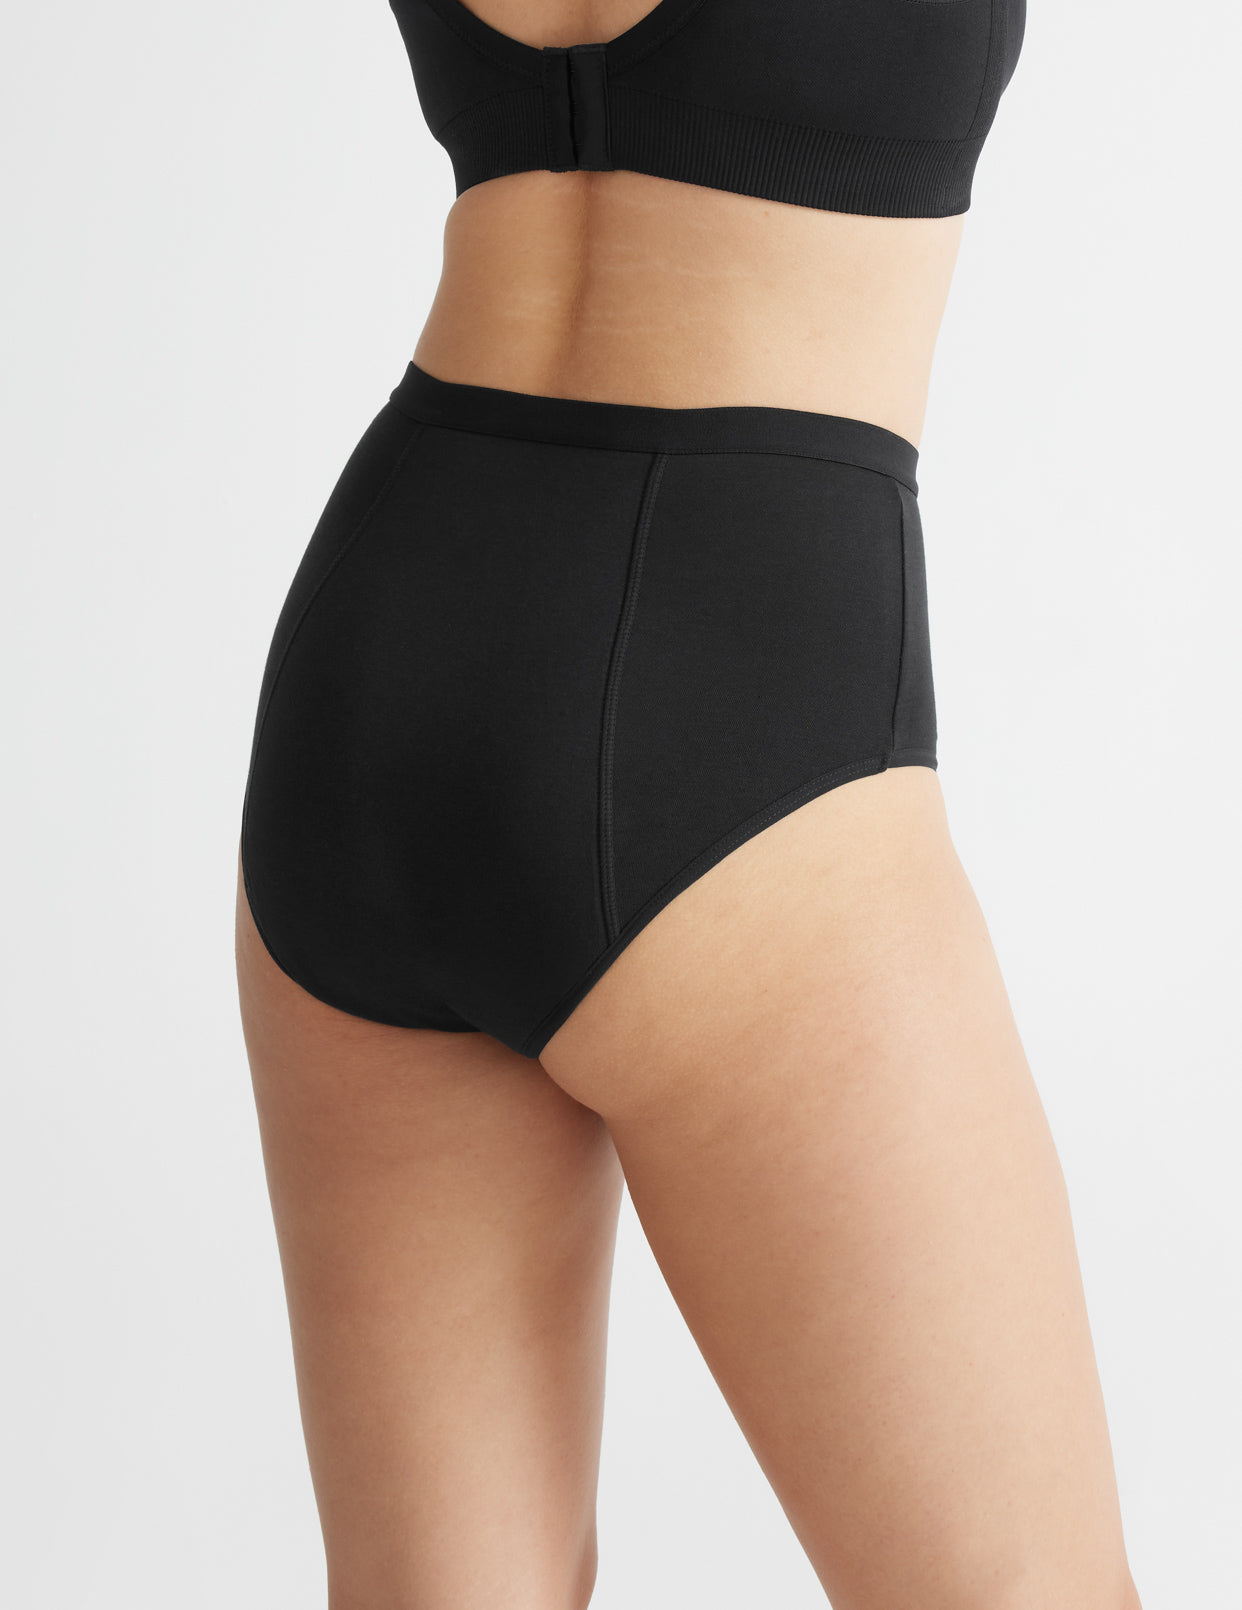 How menstrual underwear brand Knix landed one of the largest exits